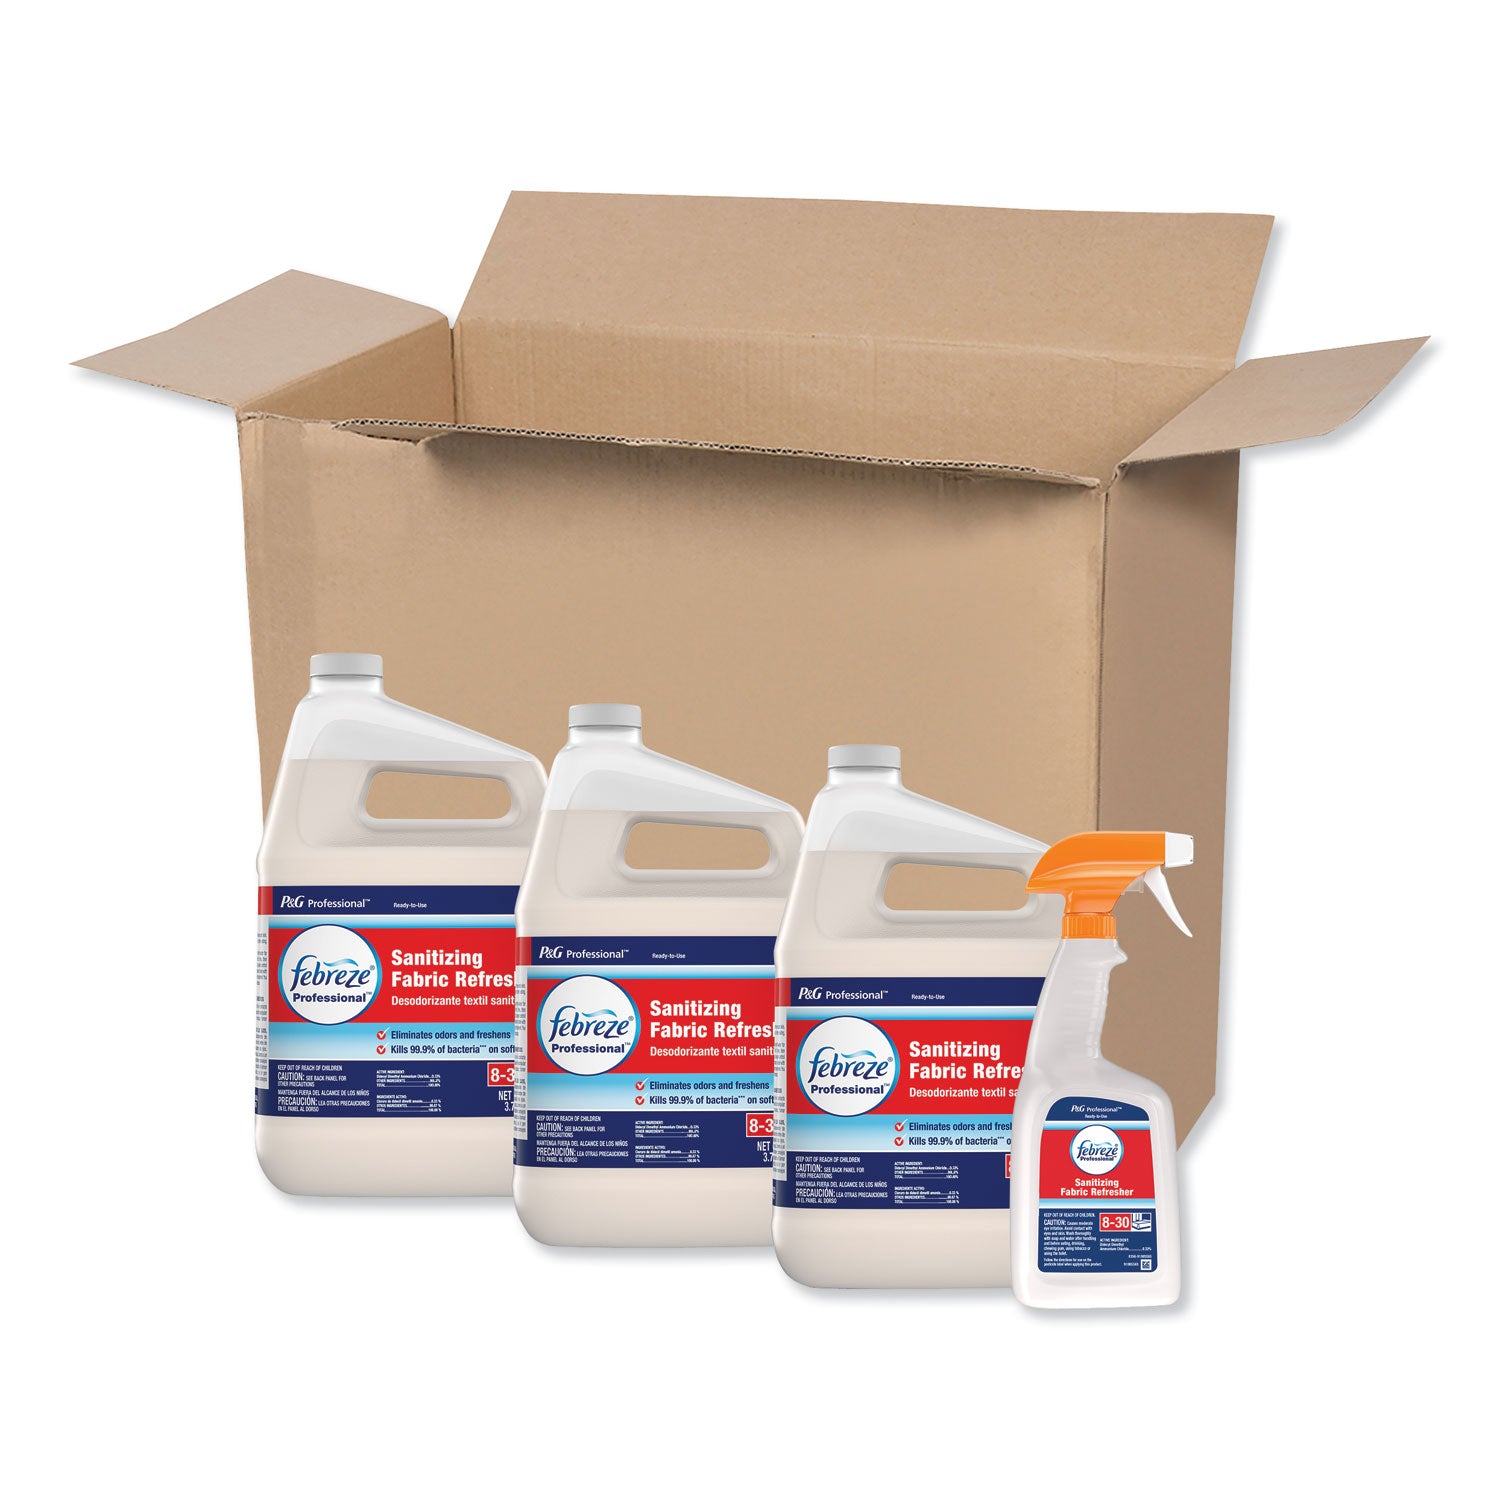 professional-sanitizing-fabric-refresher-light-scent-1-gal-bottle-ready-to-use-3-carton_pgc72136 - 1